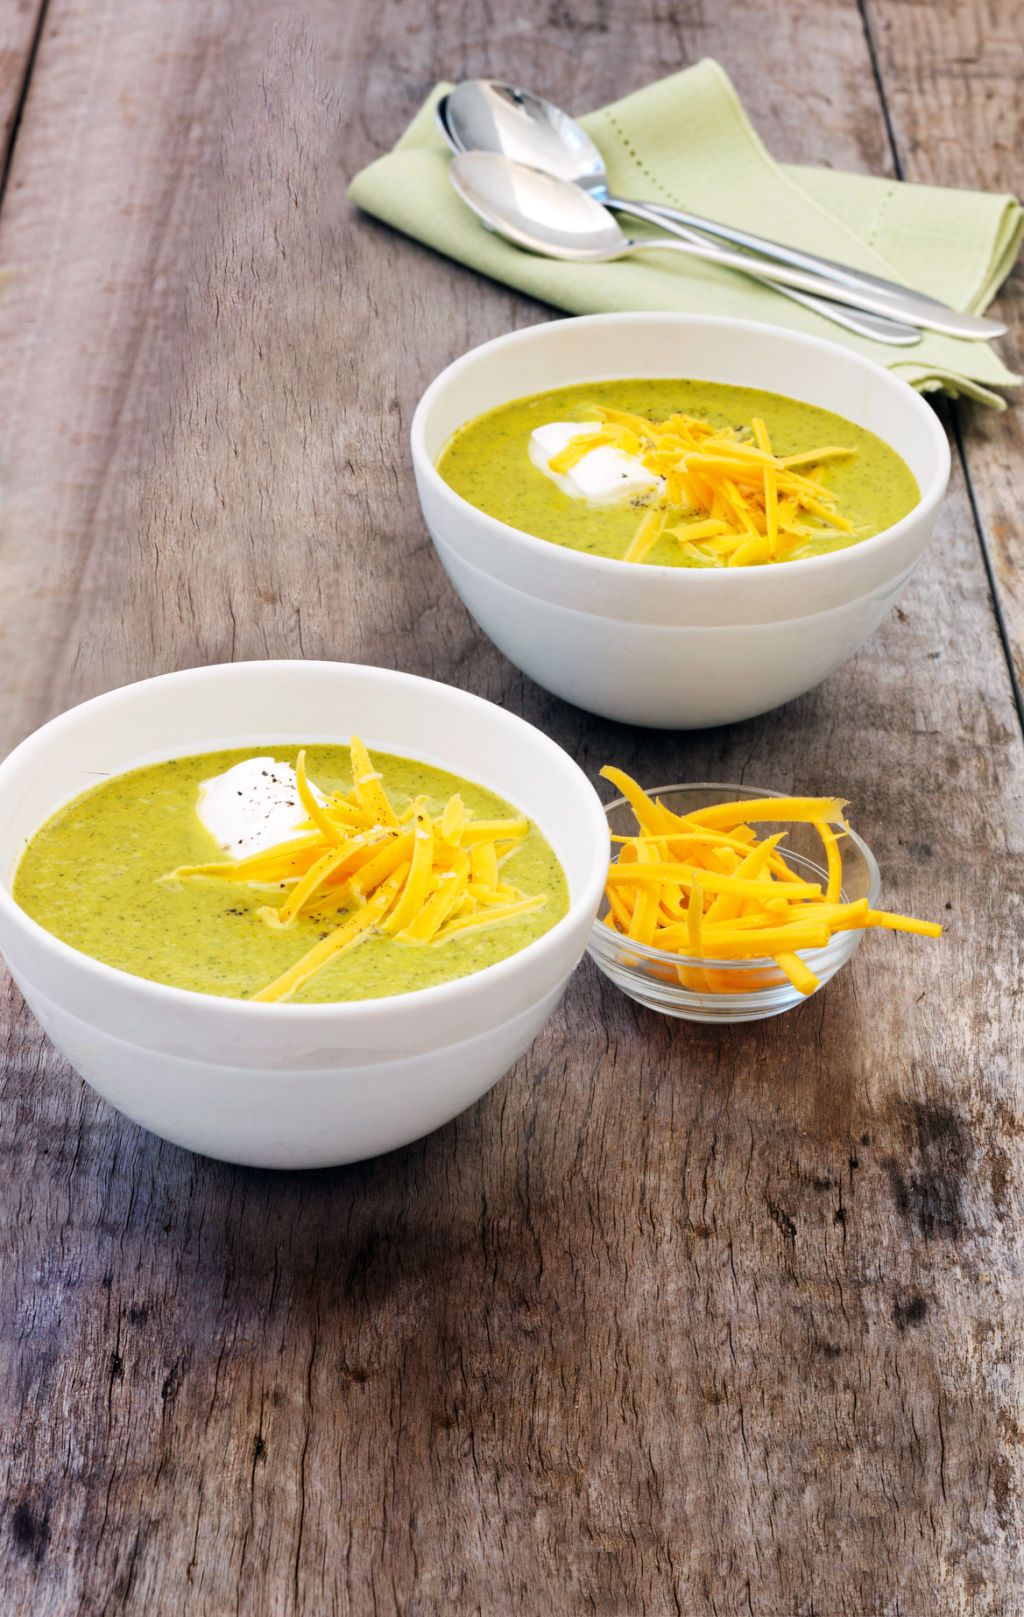 <p>v</p> <p><strong>Recipe:</strong> <a href="roasted-broccoli-soup-recipe-wdy0315" target="_blank"><strong>Roasted Broccoli Soup</strong></a></p>